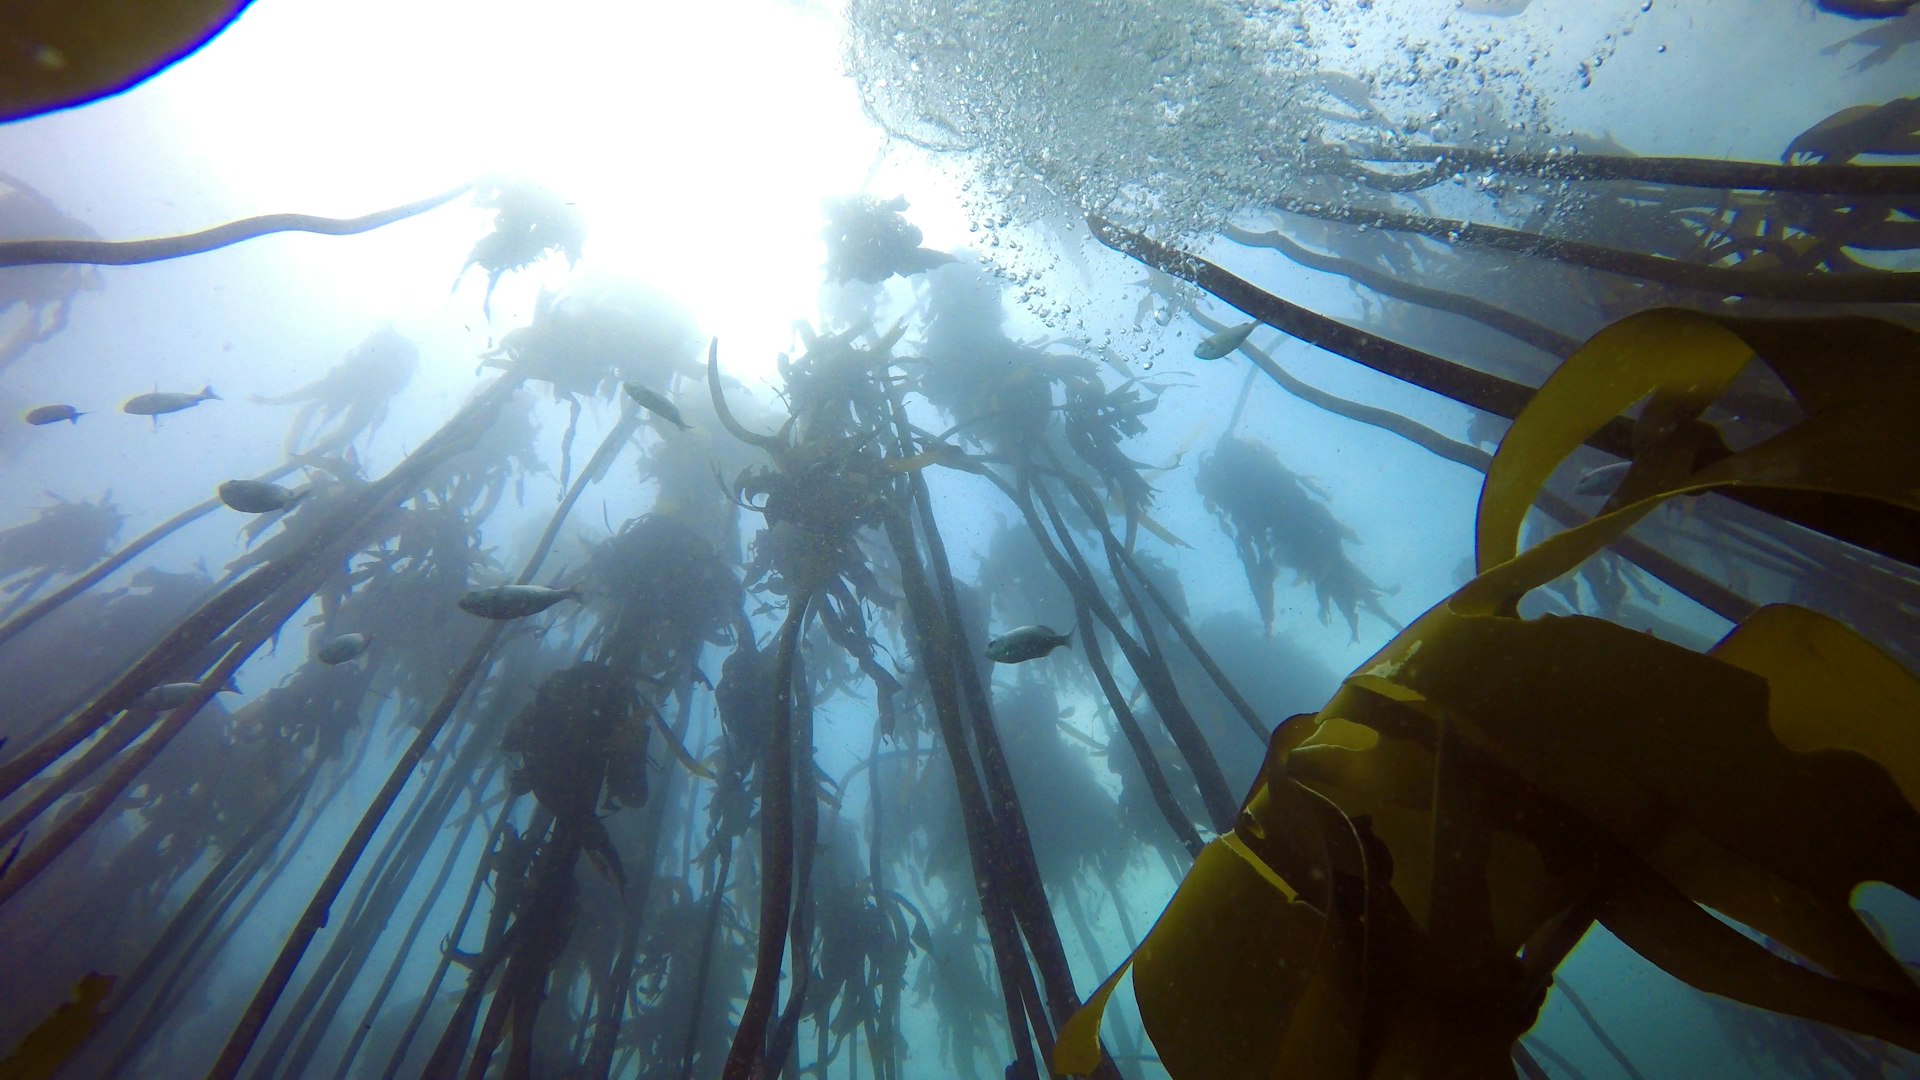 The photo is taken from under water, peering up at the surface. In the foreground, tall stands of vivid green kelp reach towards the surface as a school of big, silvery fish pass overhead through the light blue water. Scuba diving in national parks